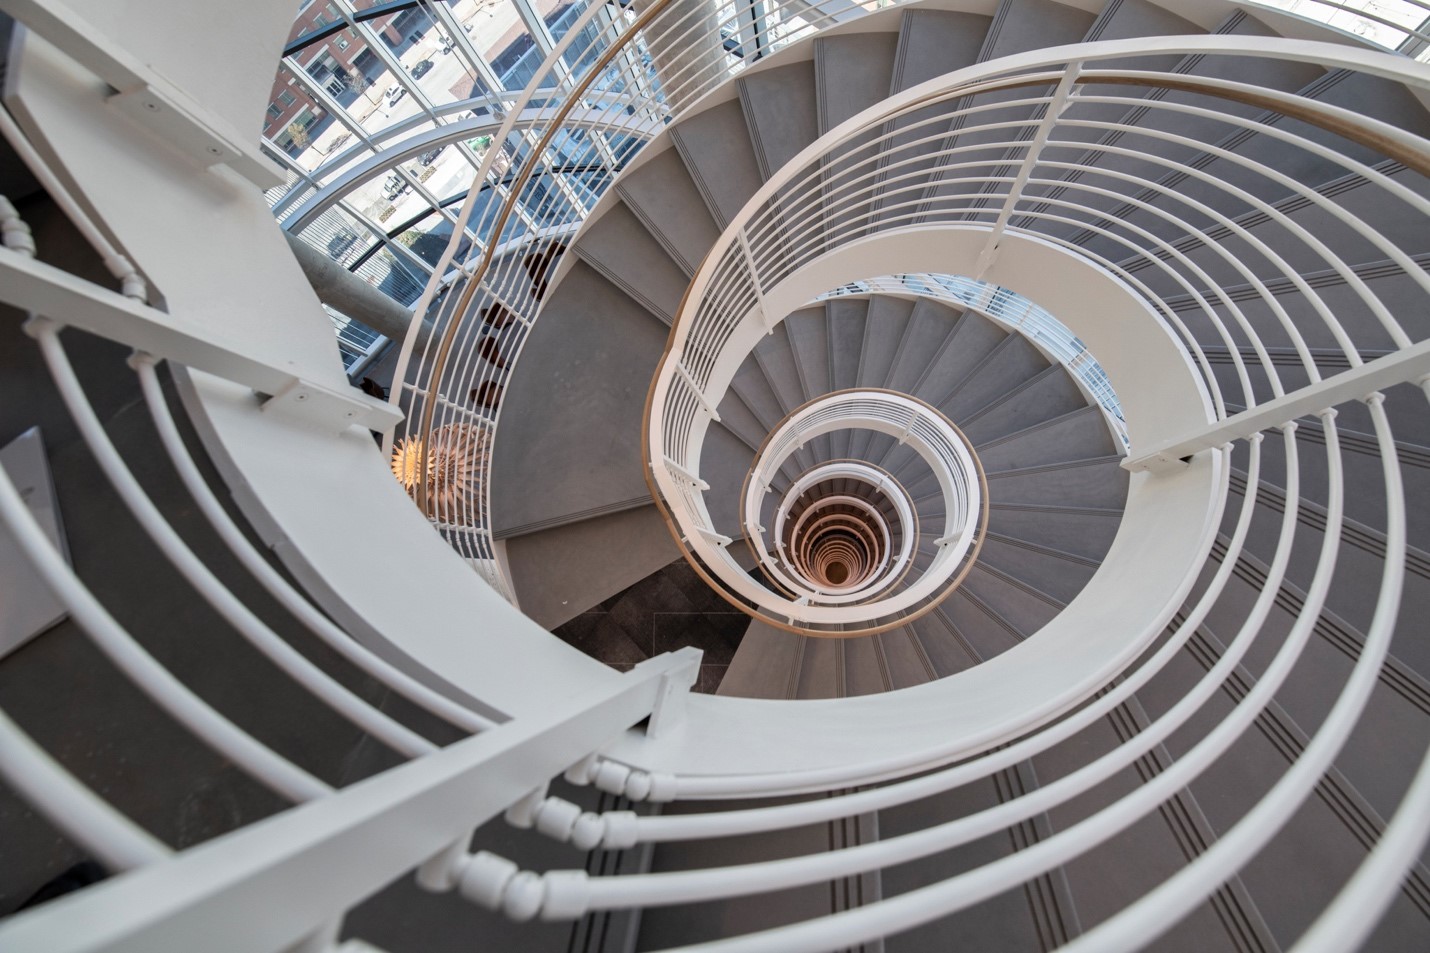 Georgia Tech is home to the world’s tallest spiral staircase, located in the Tech Square CODA Building.